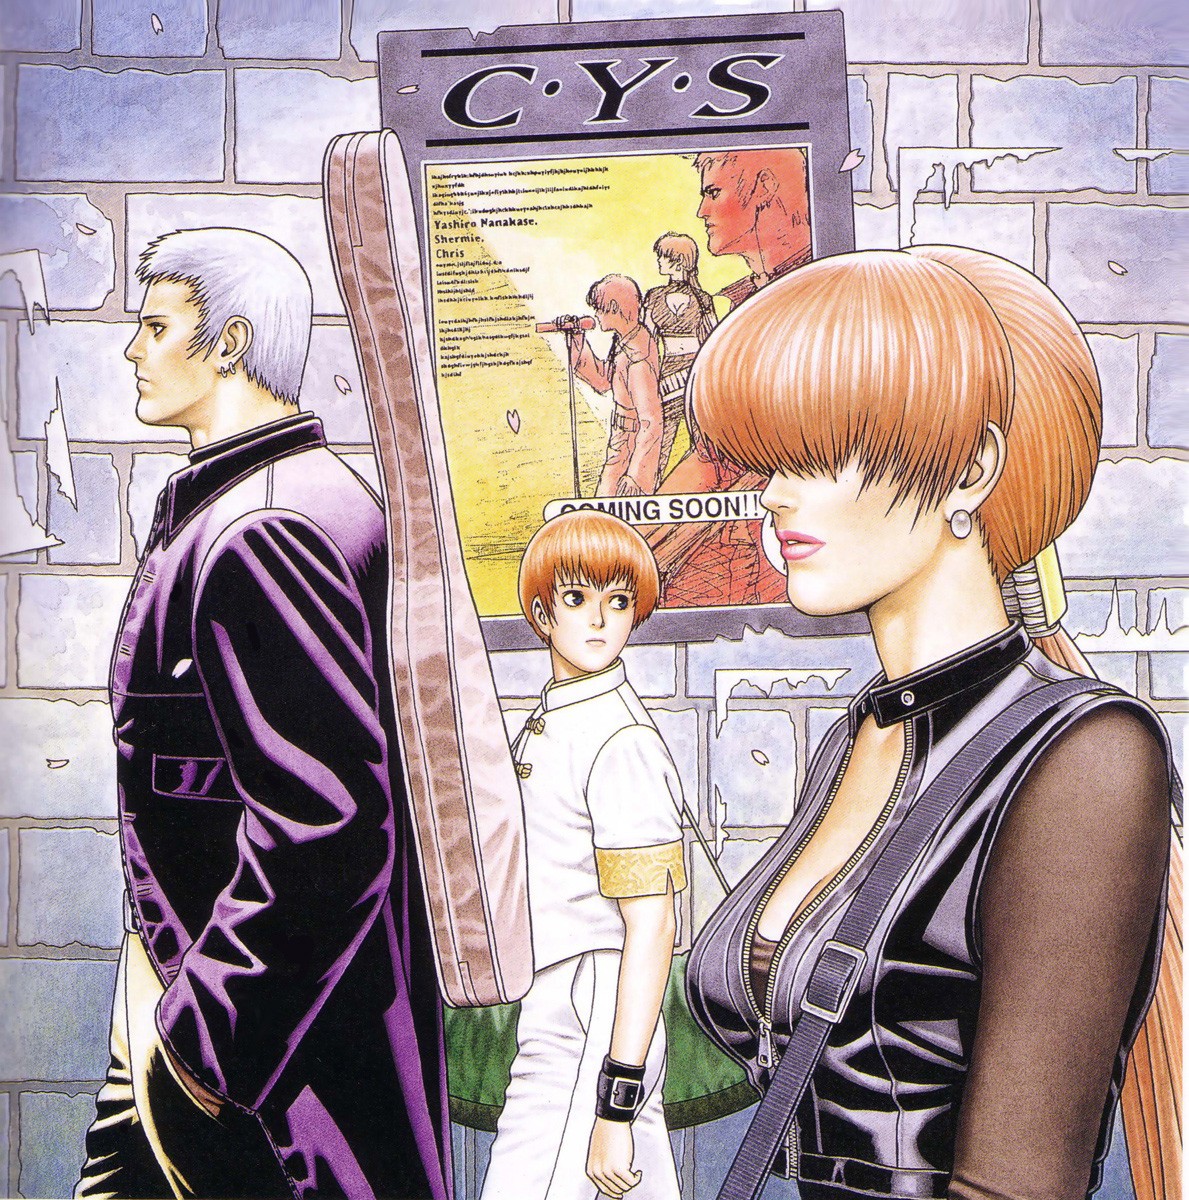 Orochi Team - Characters & Art - The King of Fighters '98